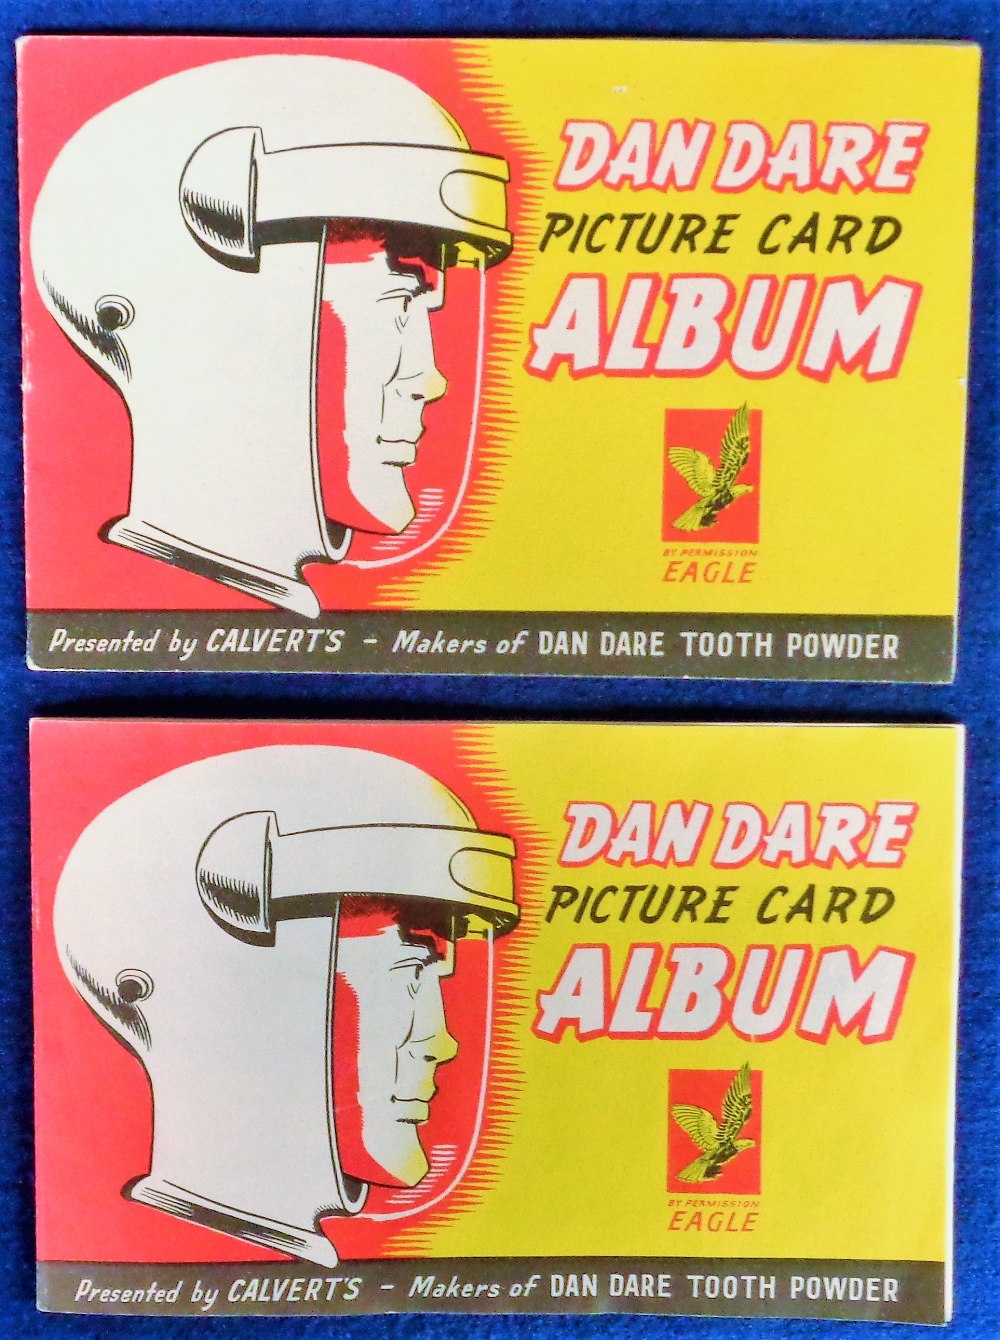 Trade albums, Calvert, Dan Dare, special album complete with a set of 25 laid down cards (vg),